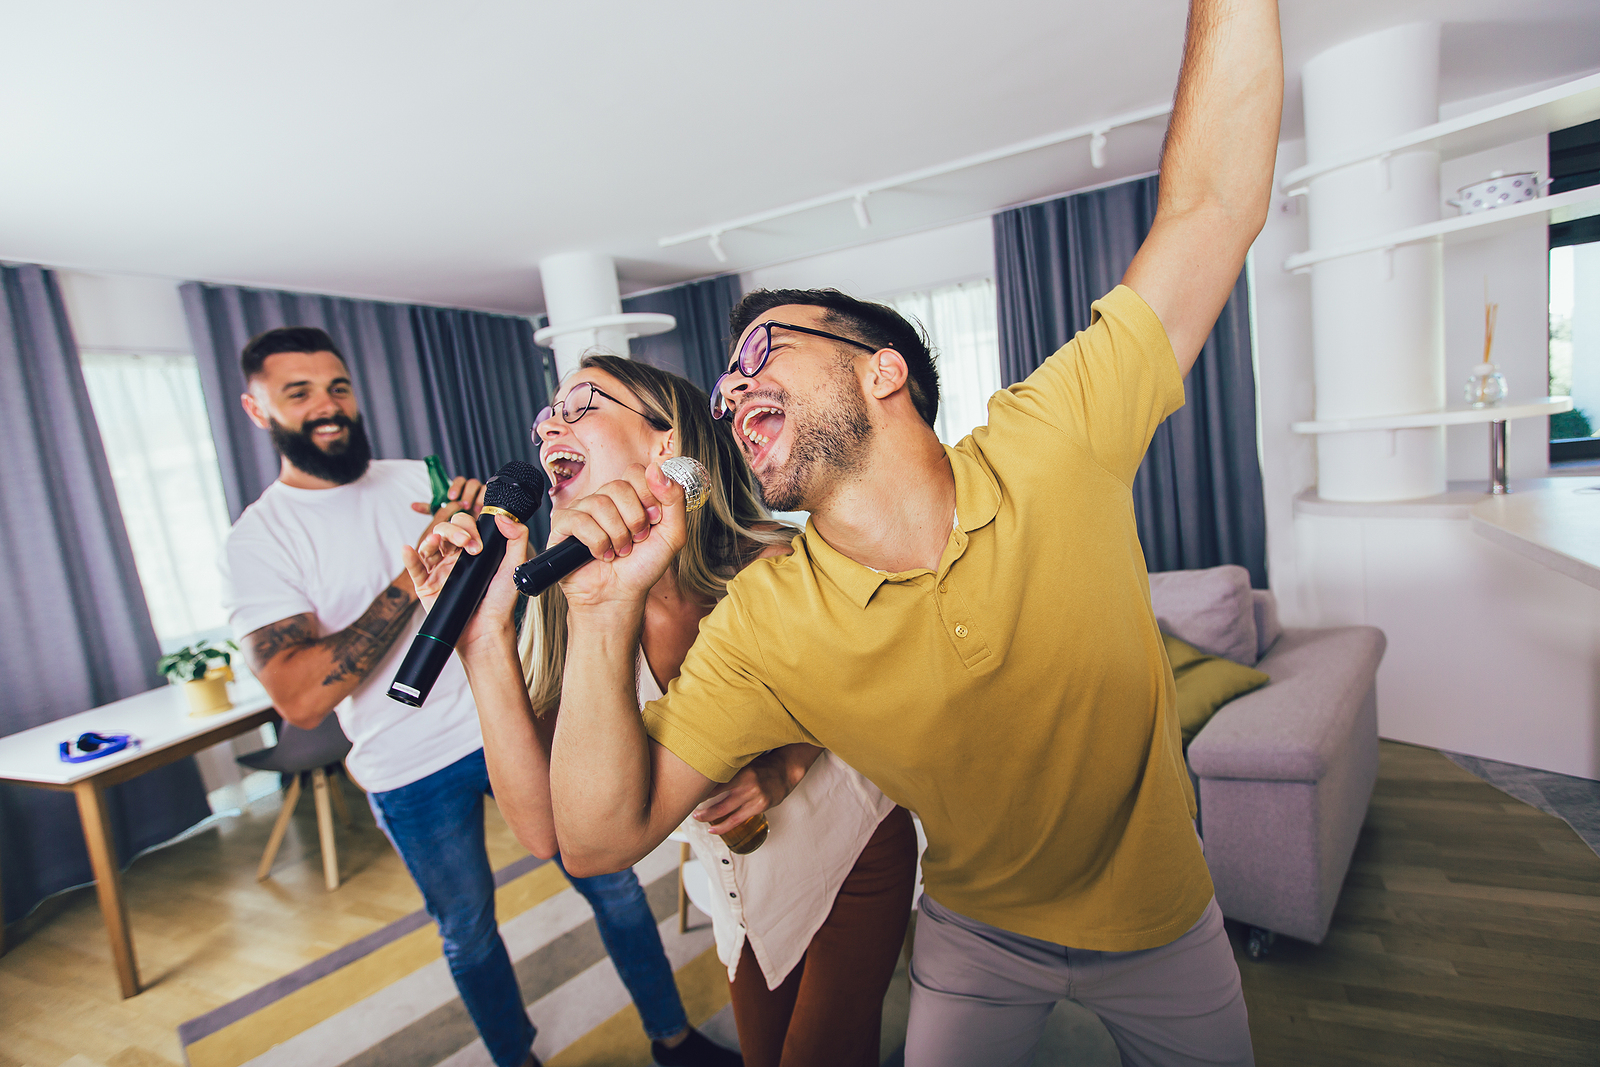 Two close friends sing together during a home karaoke get together while a friend looks on and smiles.